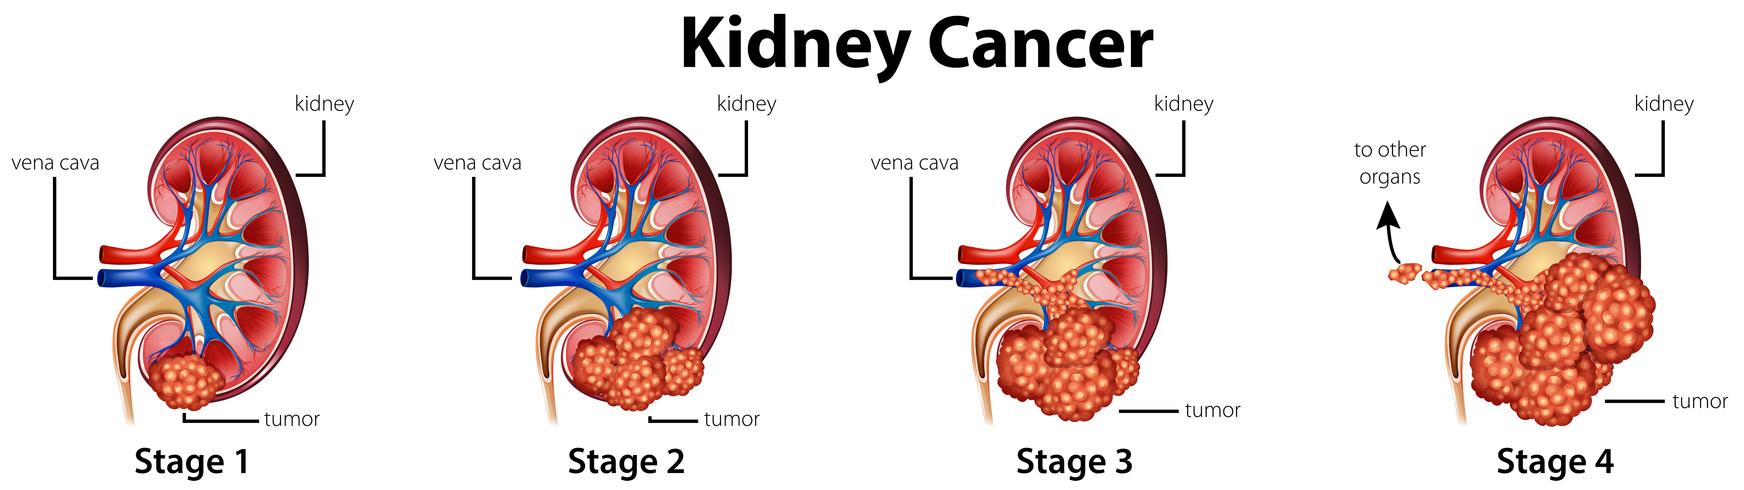 Diagram showing different stages of kidney cancer vector